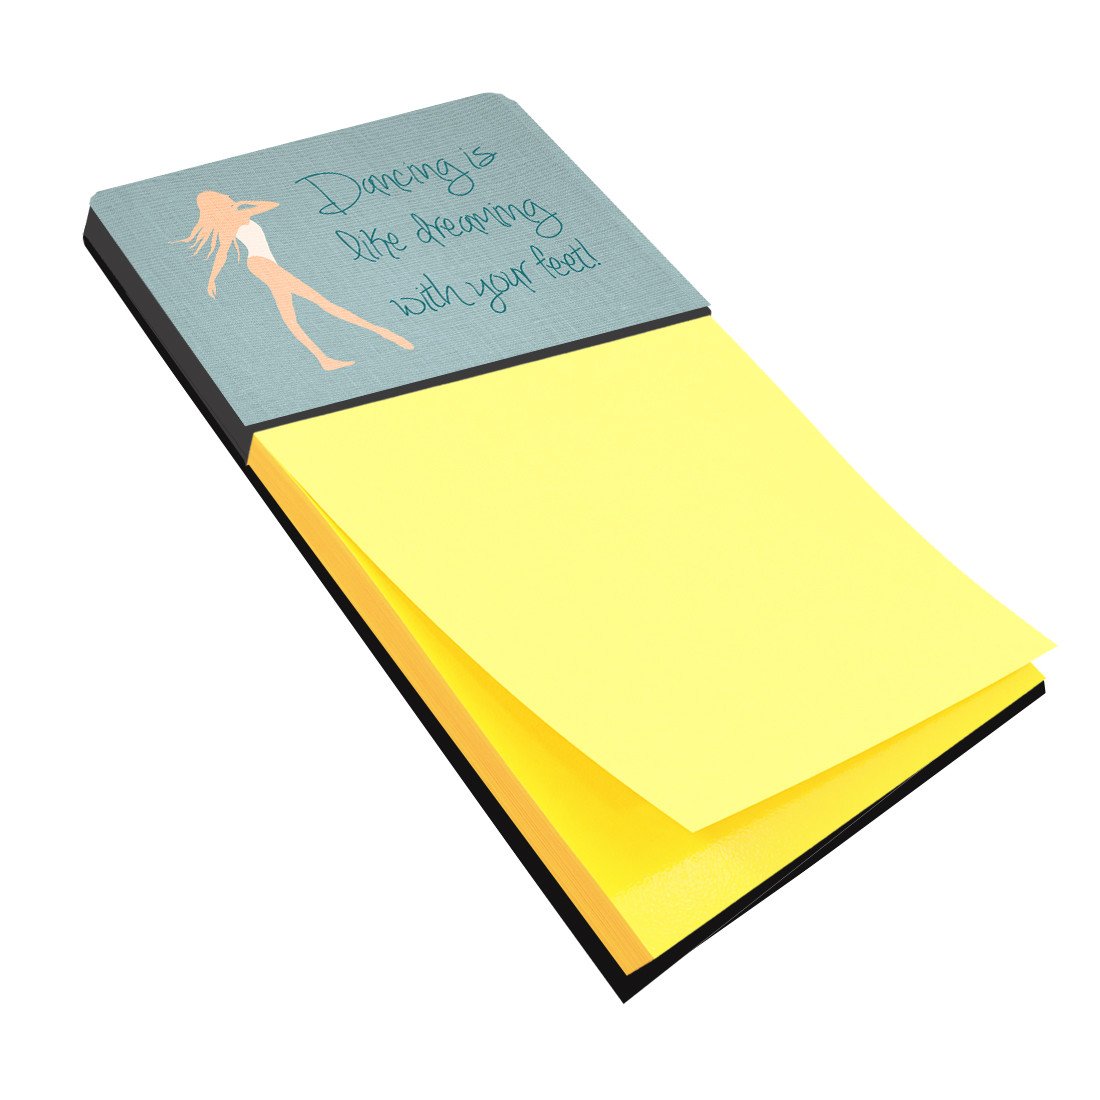 Dancing is Like Dreaming Sticky Note Holder BB5379SN by Caroline's Treasures